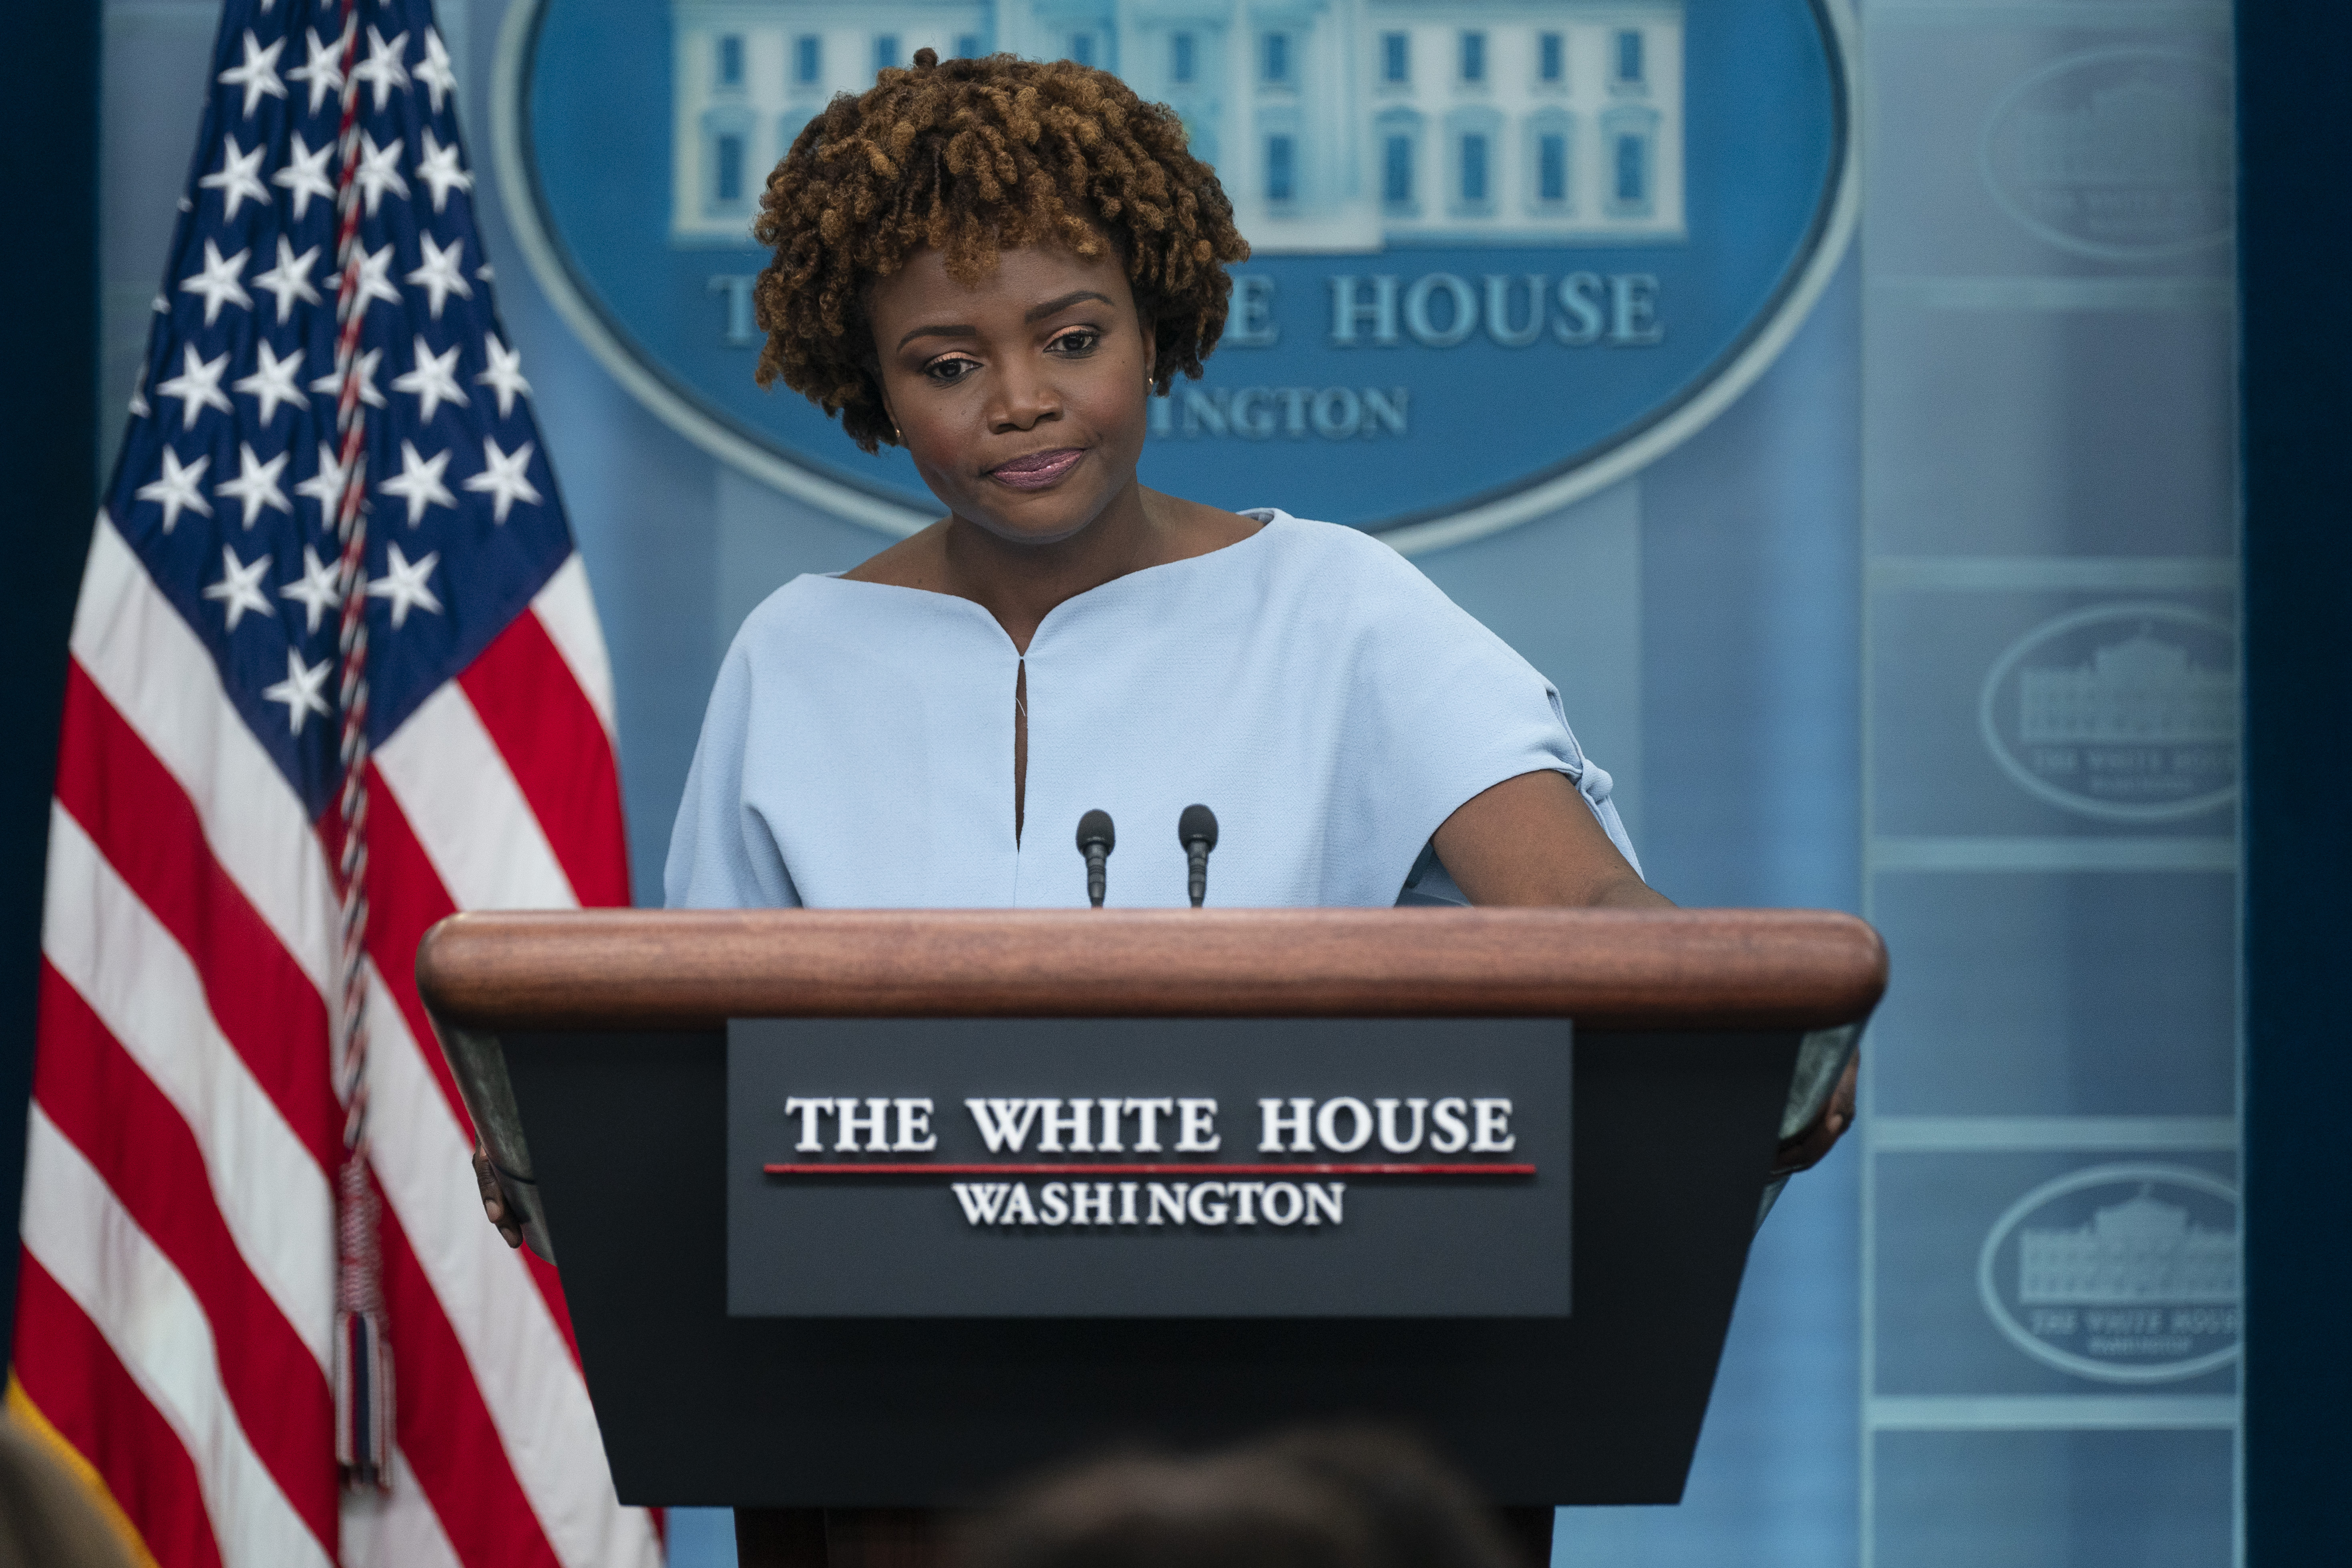 White House press secretary Karine Jean-Pierre listens to a question during a press briefing at the White House, Tuesday, July 5, 2022, in Washington. (AP Photo/Evan Vucci)